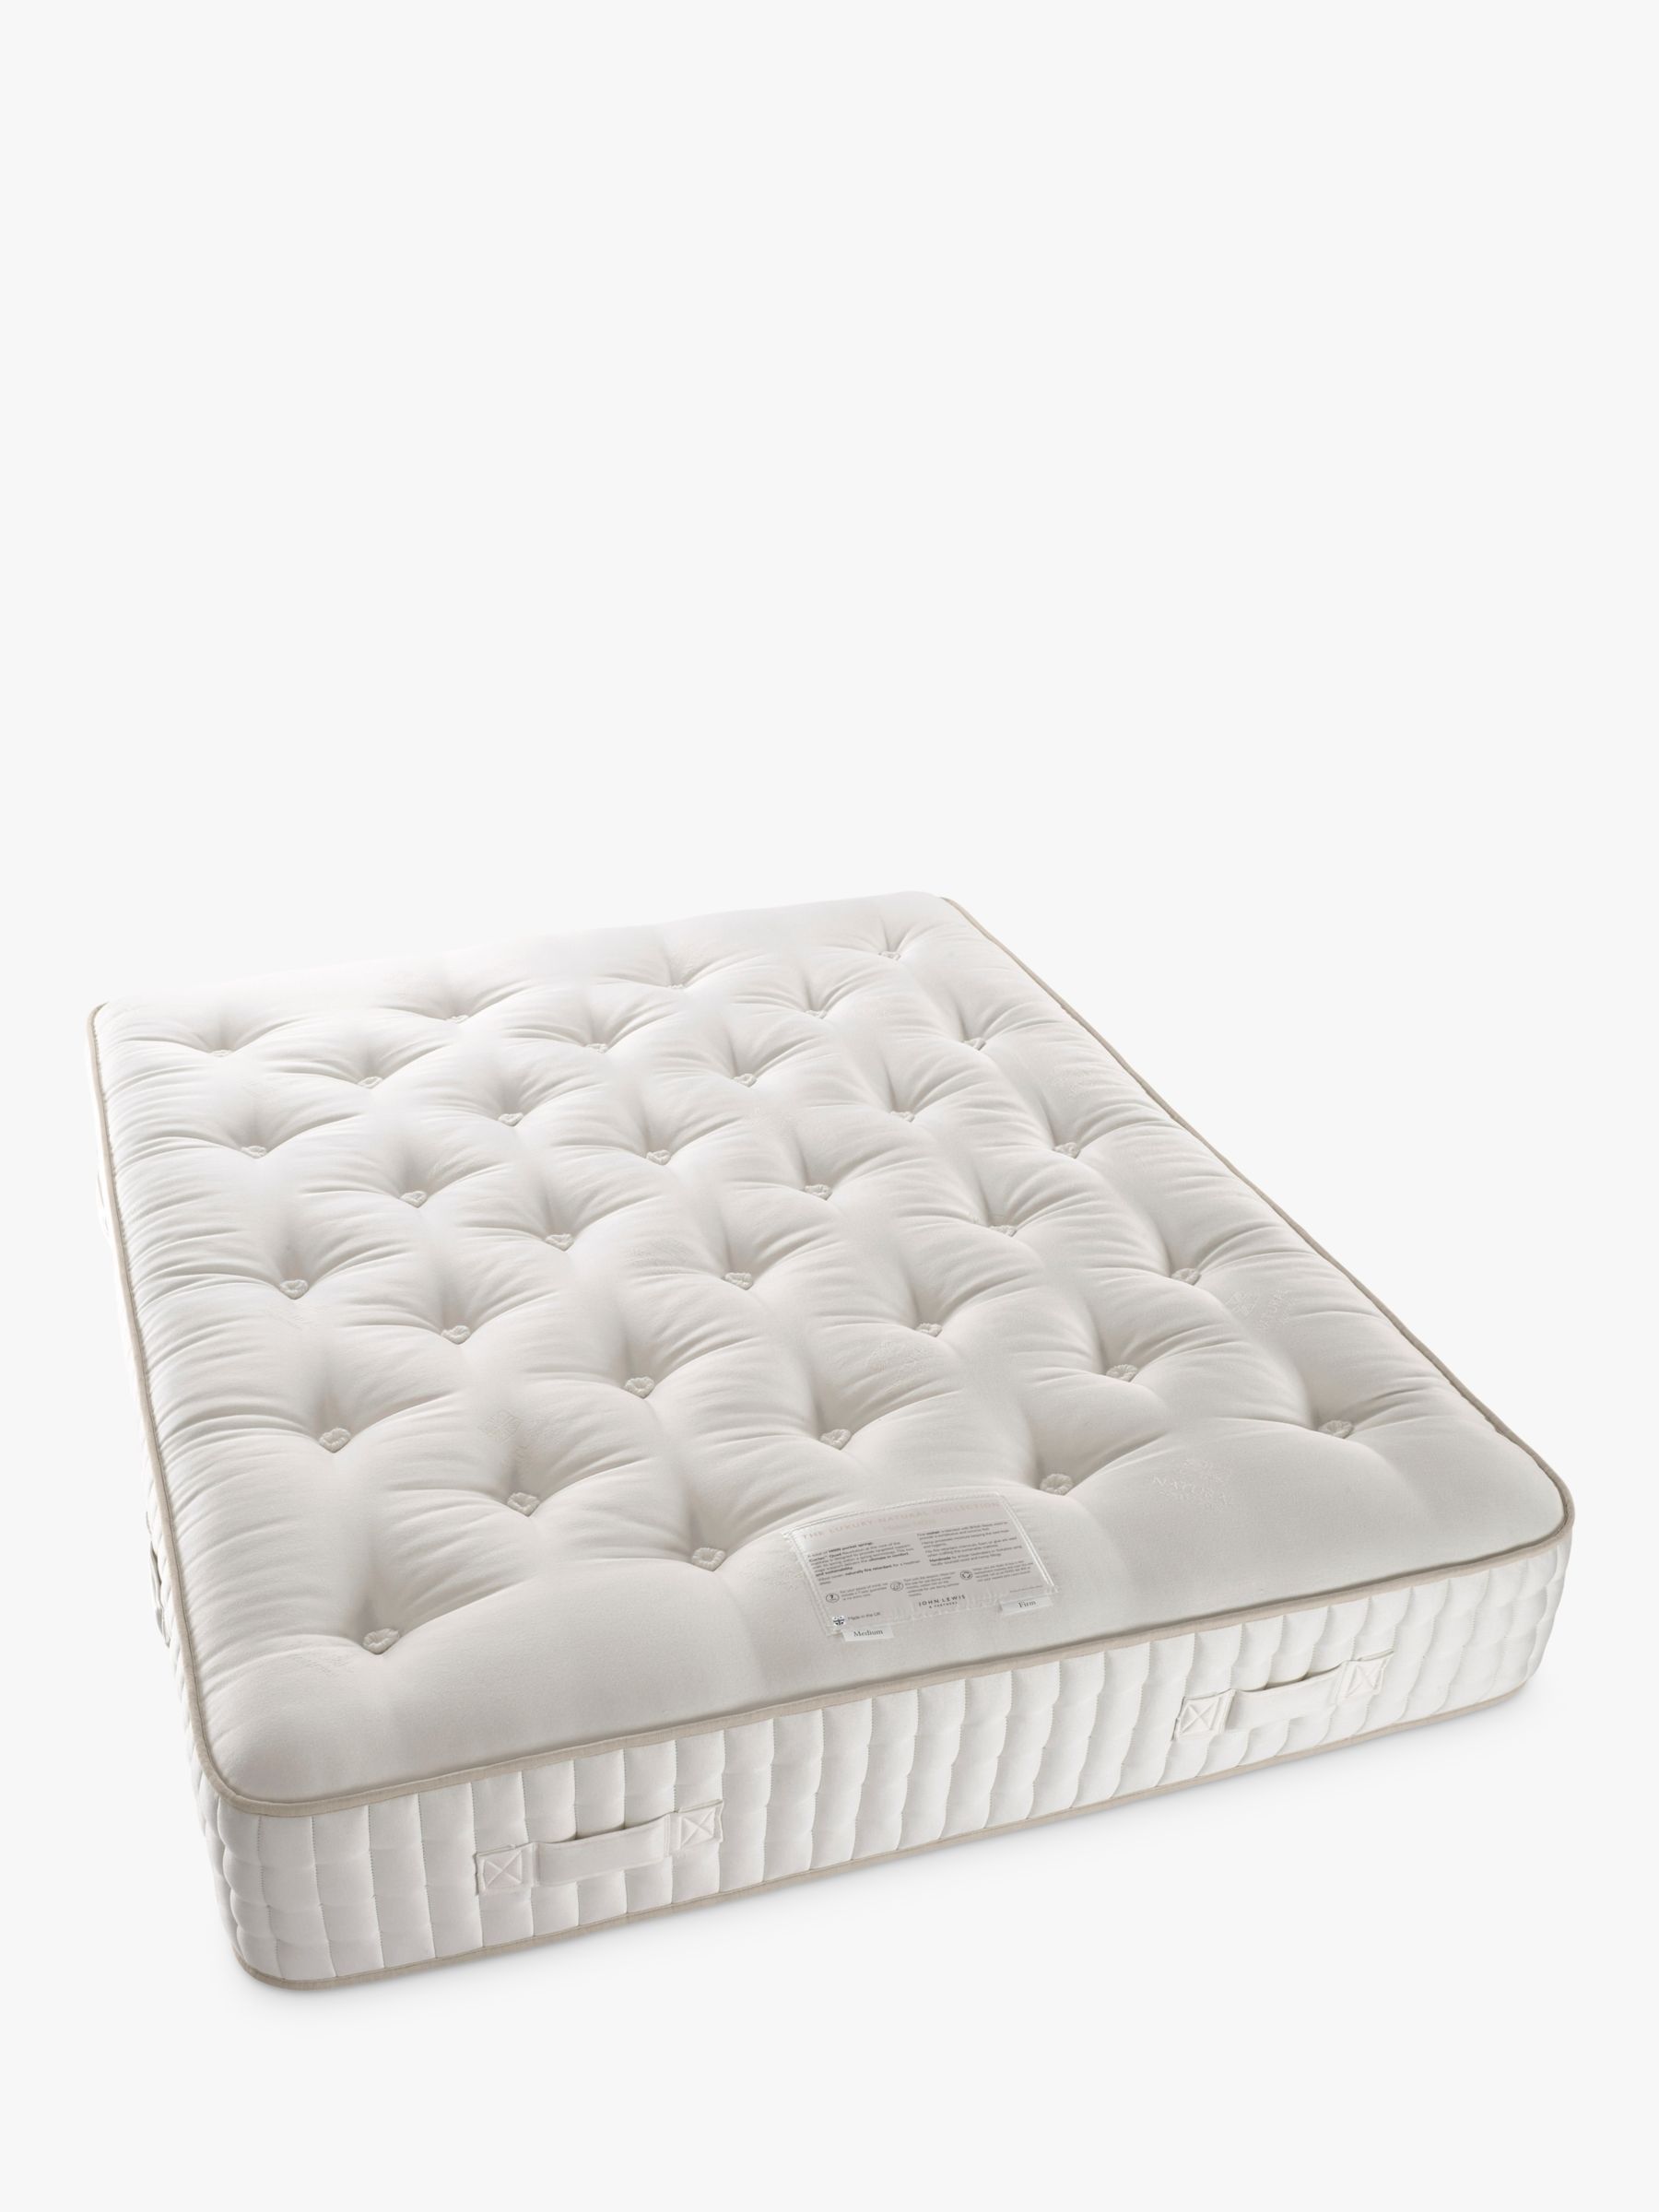 Photo of John lewis luxury natural collection mohair 14000 small double firmer tension pocket spring mattress